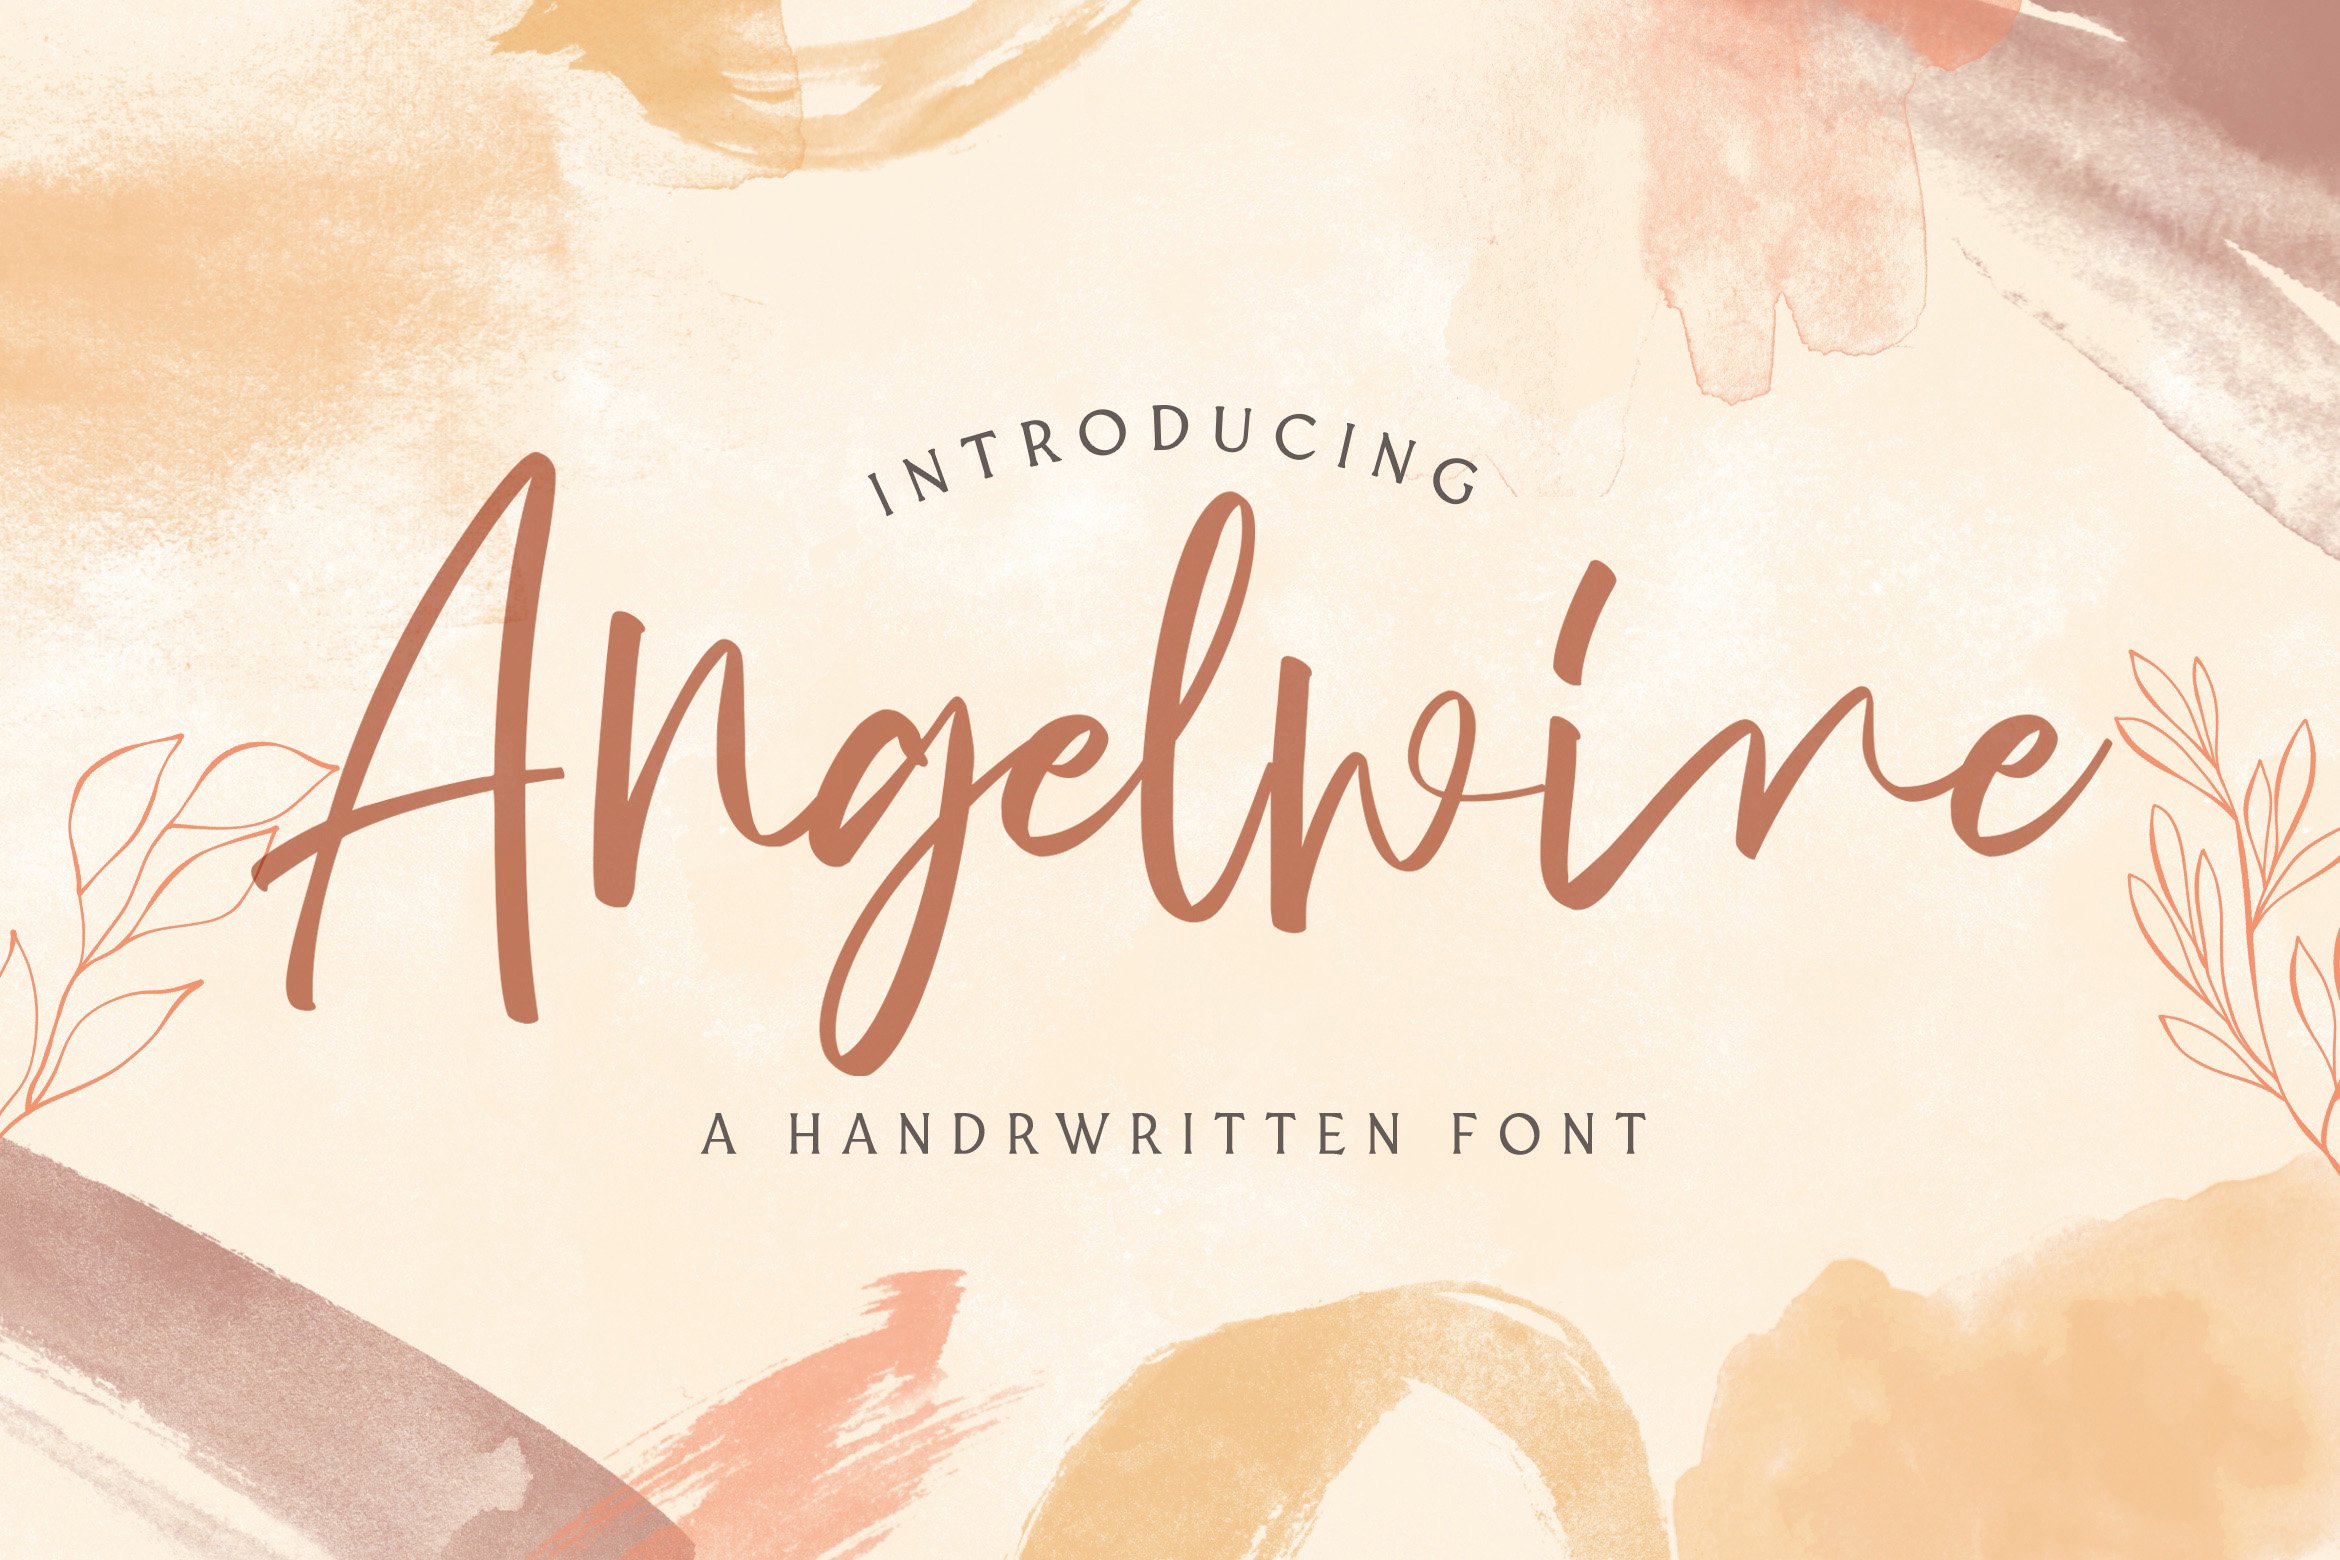 Angelwine - Handwritten Font cover image.